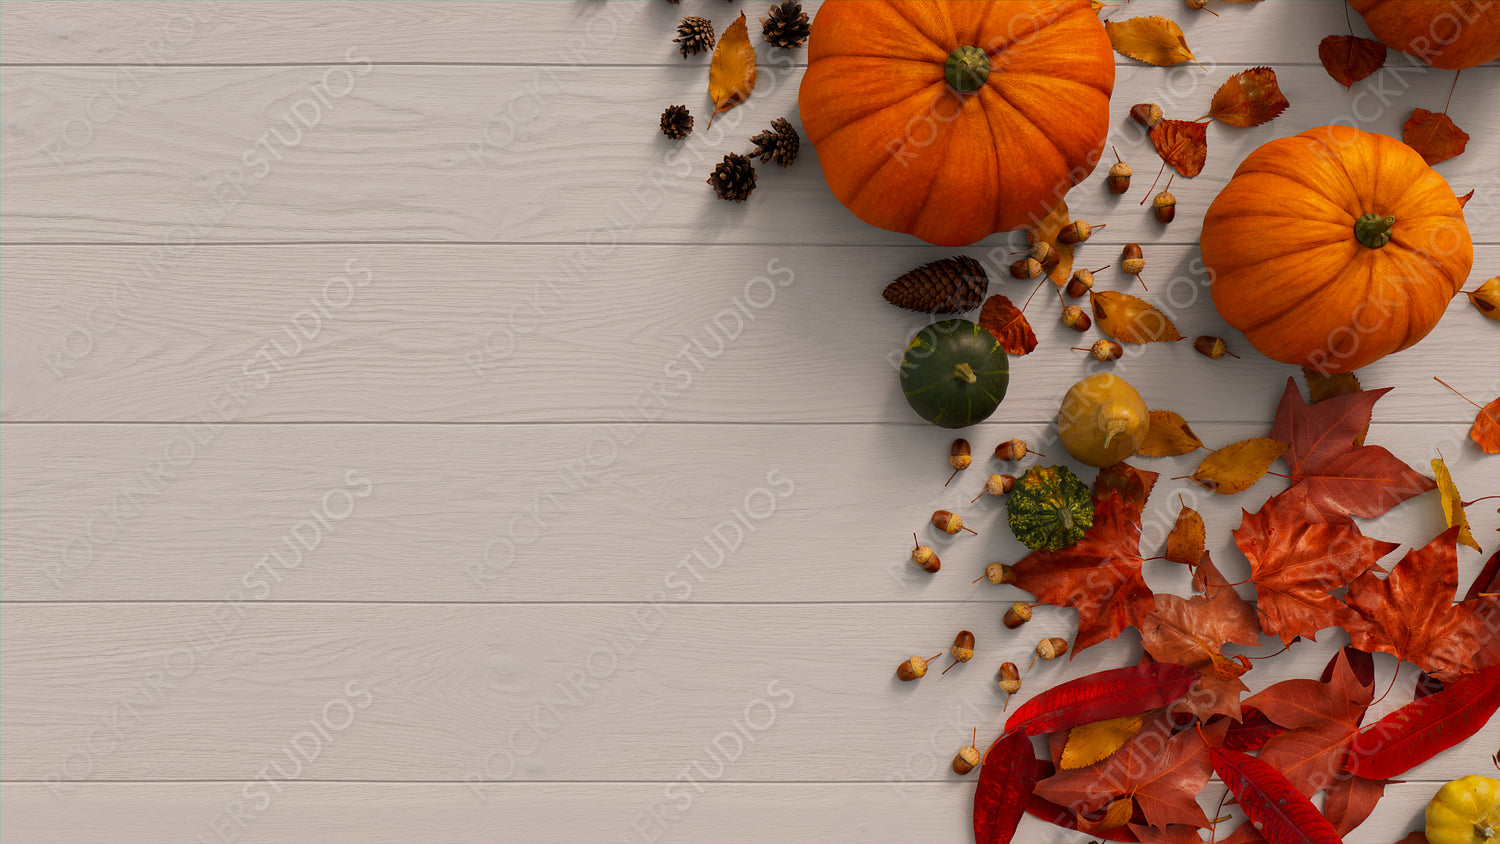 Harvest Background including Pumpkins, Pine cones, Autumn leaves and Fruits.